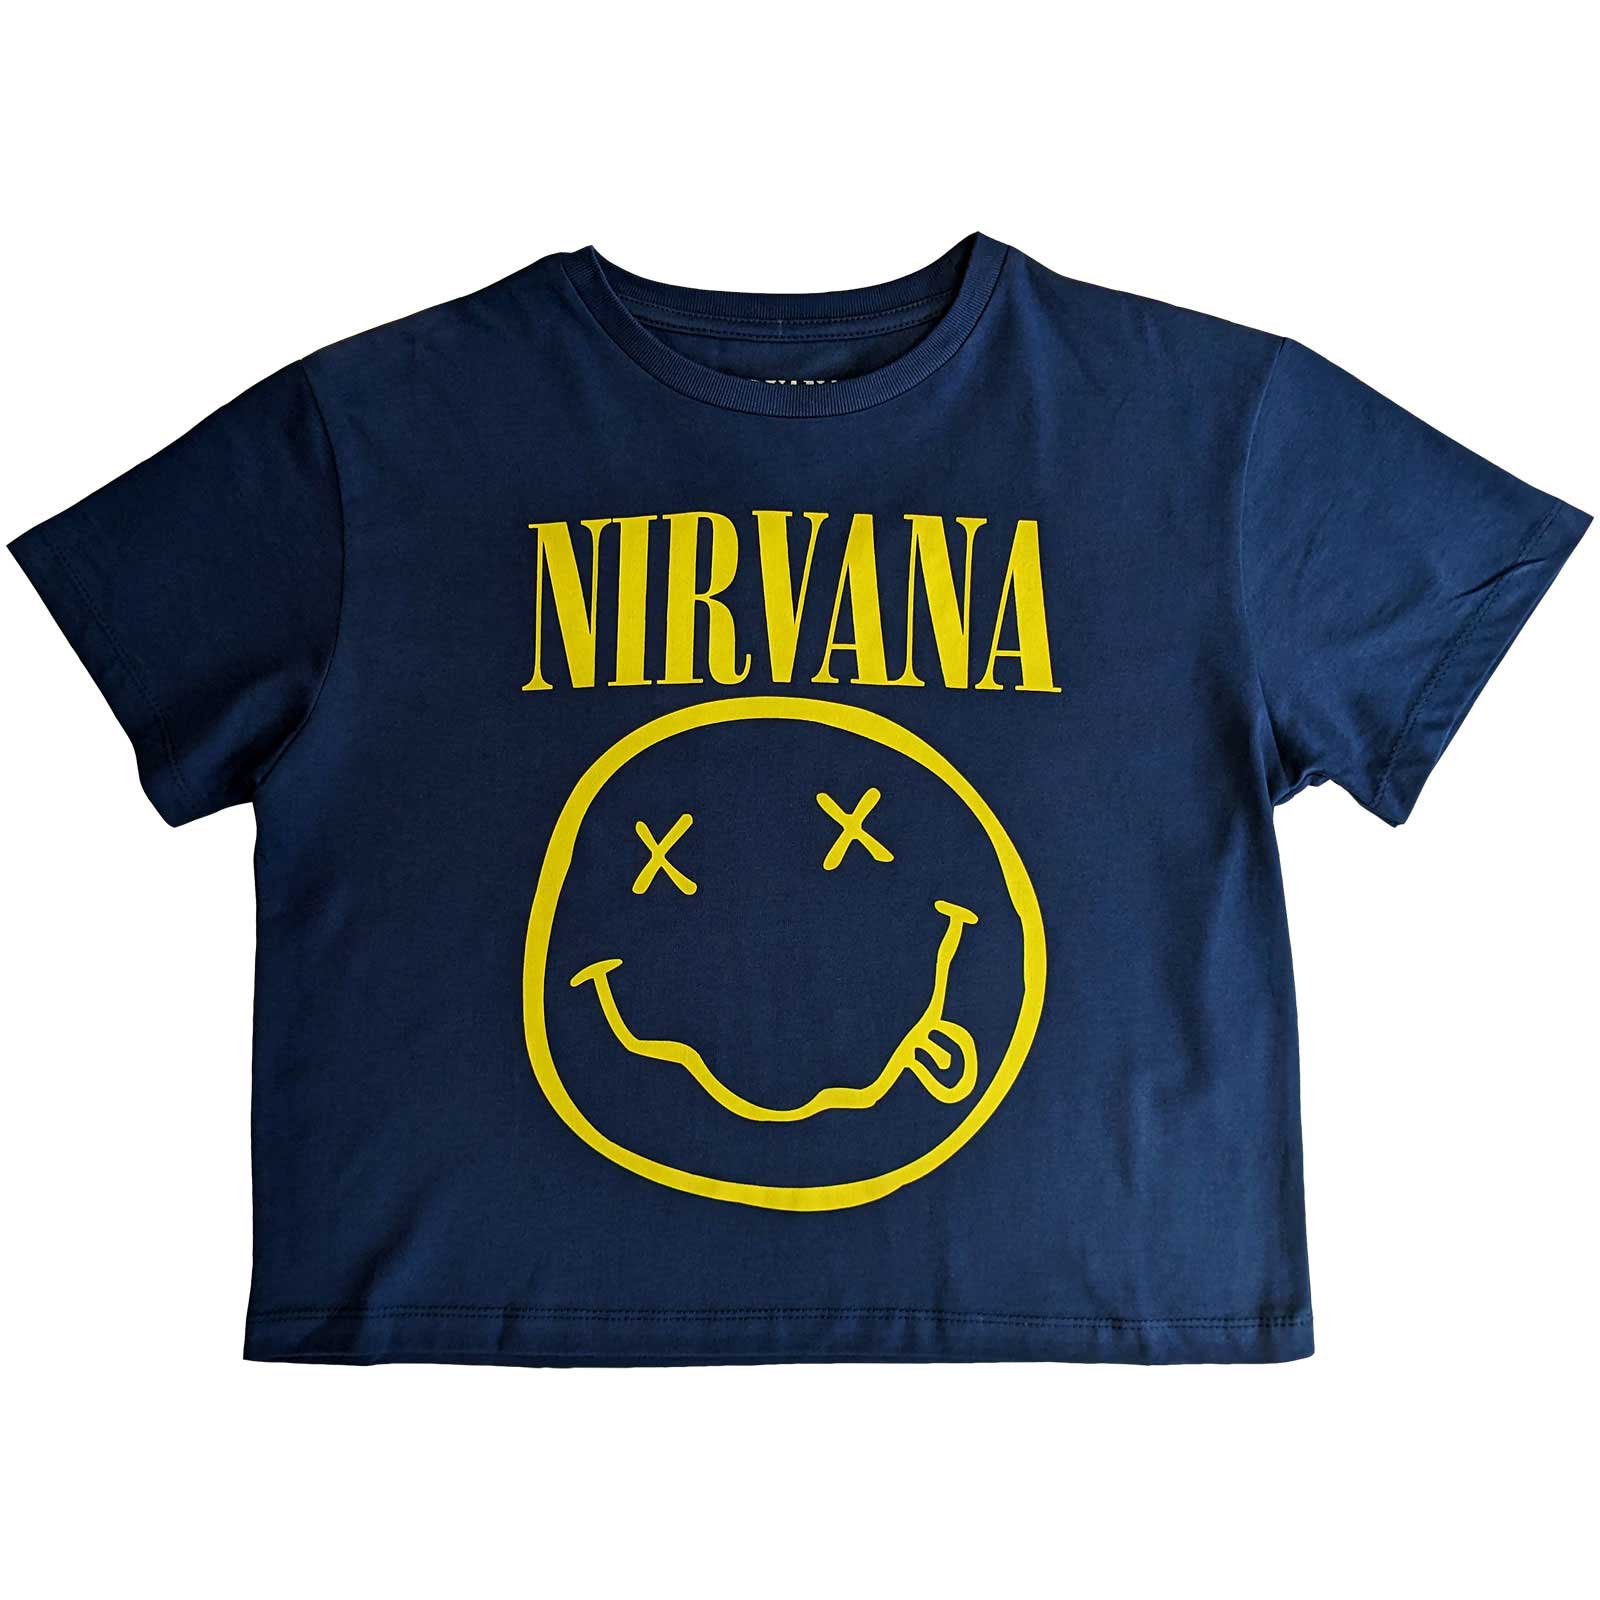 Nirvana Ladies Crop Top: Yellow Smiley Flower Sniffin (back Print)-hotRAGS.com